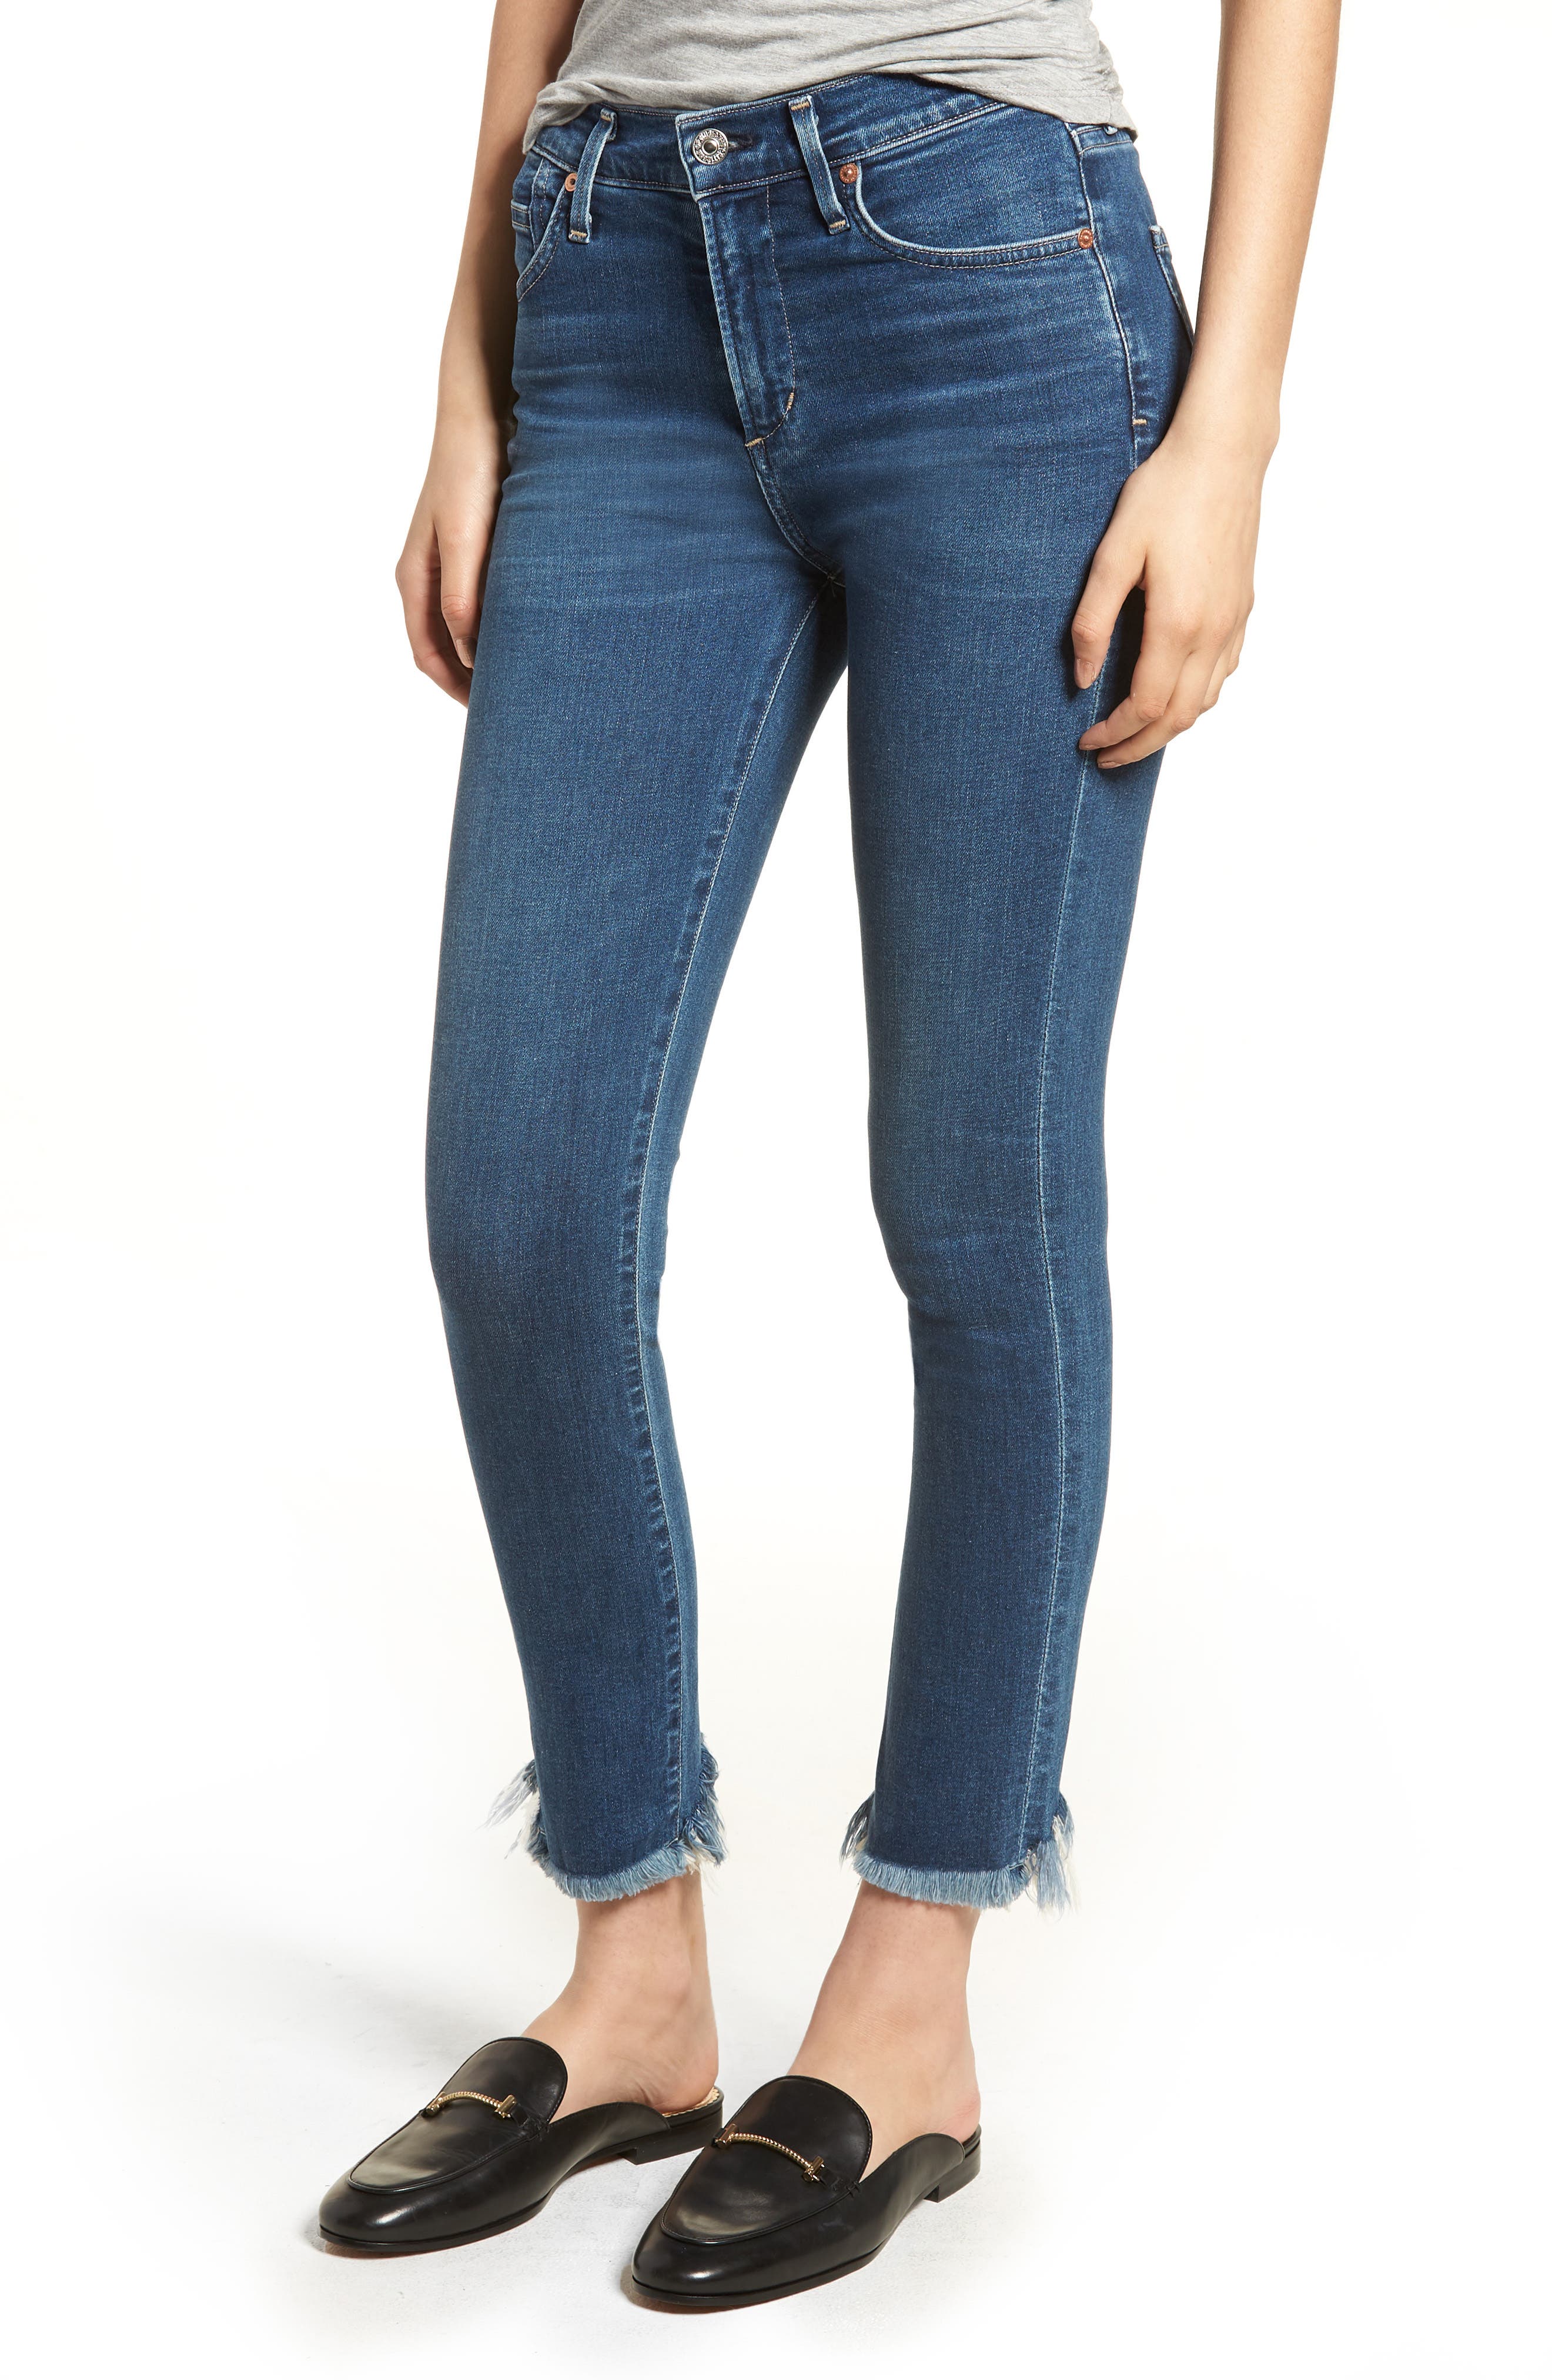 citizens of humanity rocket high rise skinny sale